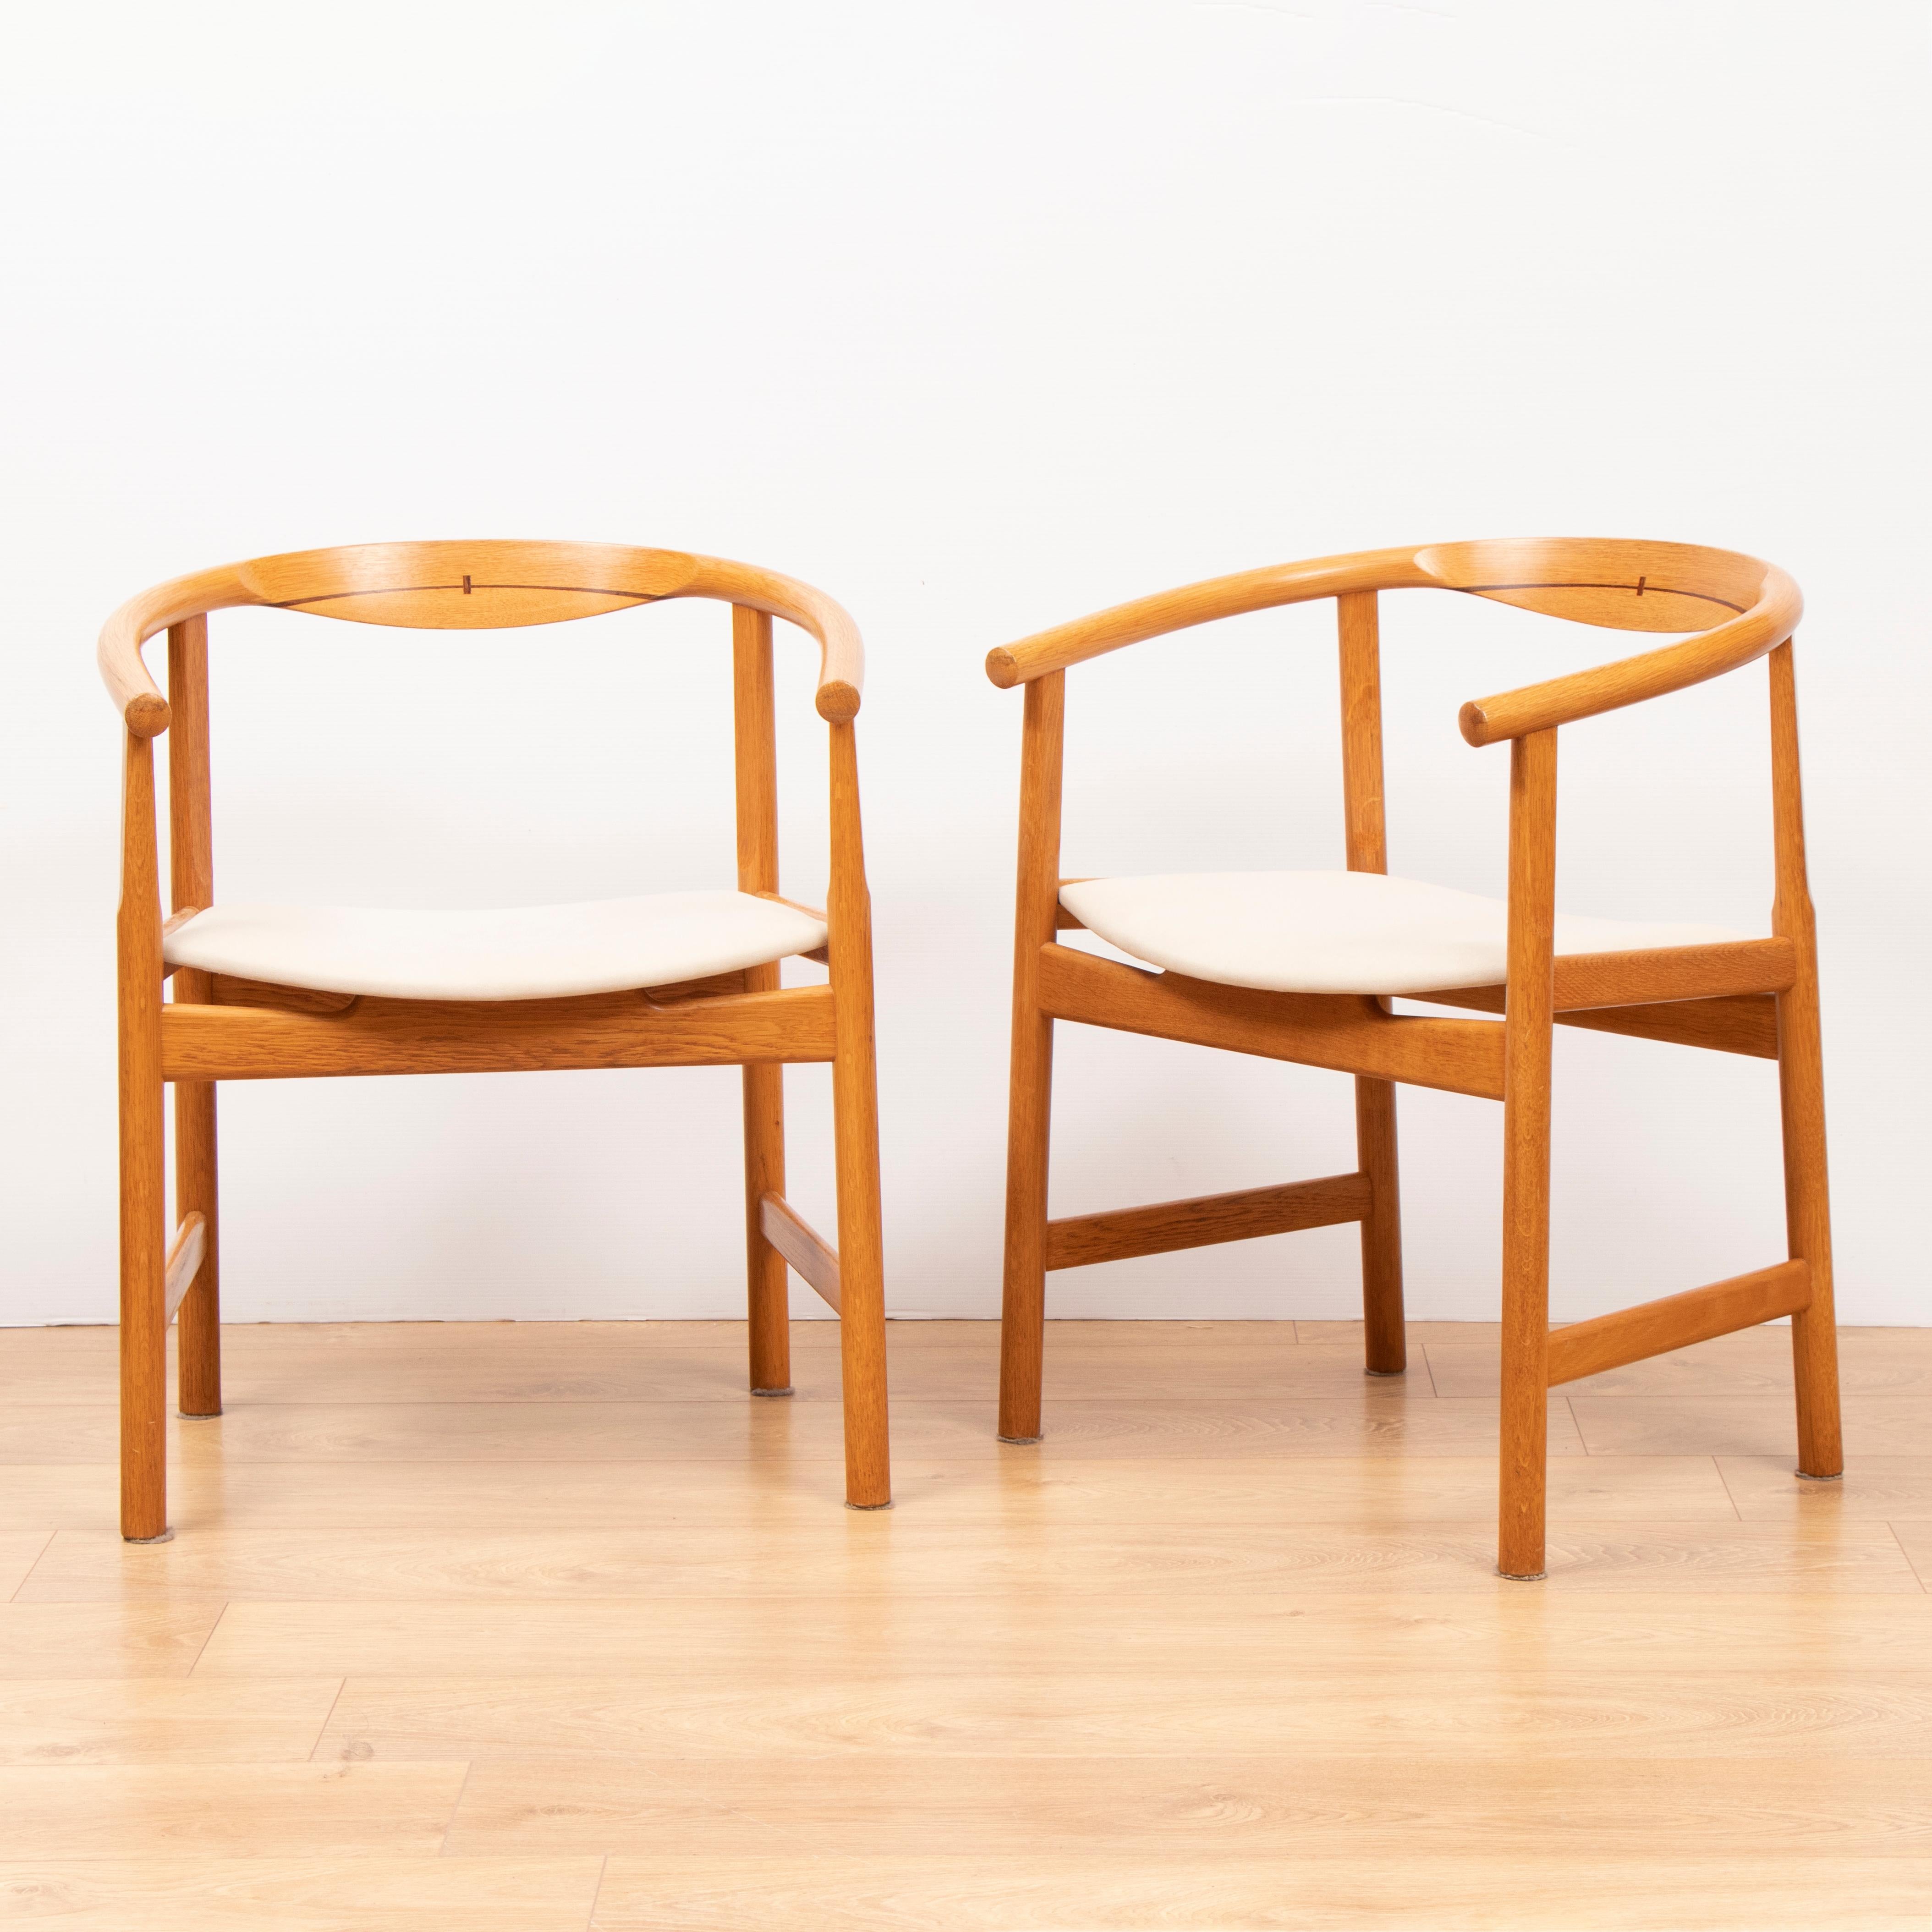 Set of Four Hans J. Wegner JH 203 Oak with Wenge detailing armchairs. Designed by Hans J. Wegner in 1969 for Johannes Hansen in 1969 in Denmark. The chair is made from Oak with inlaid Wenge detailing, The seats have been recovered in Romo Group's